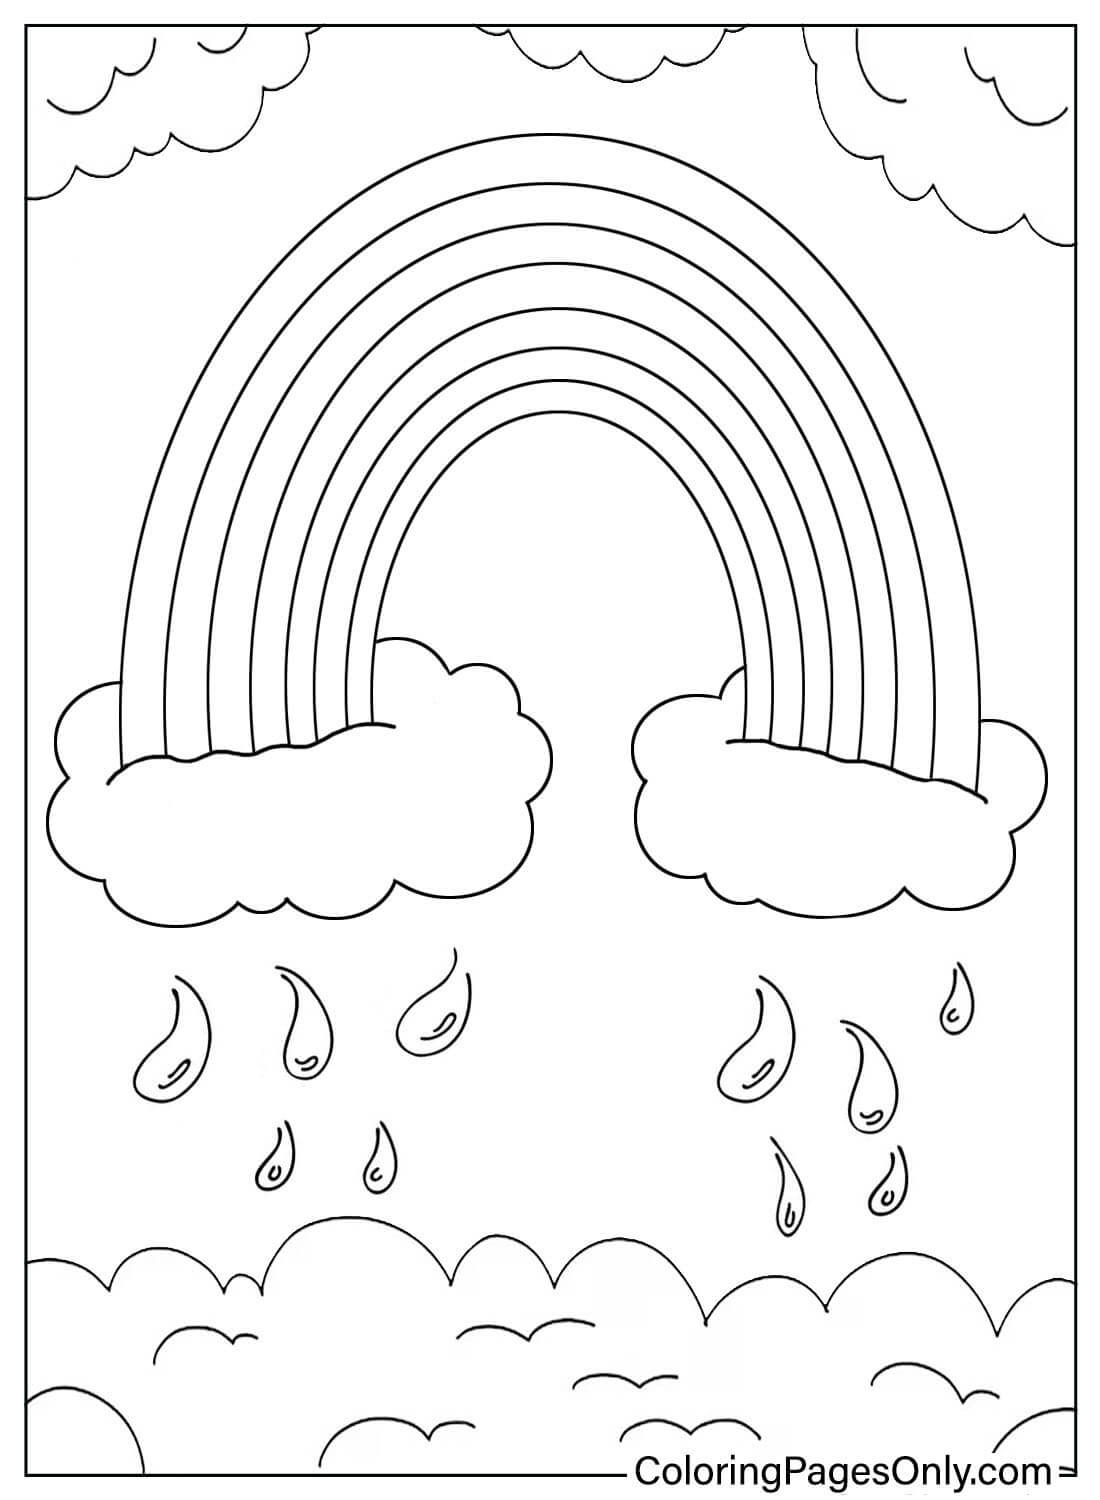 Rainbow Coloring Page Free